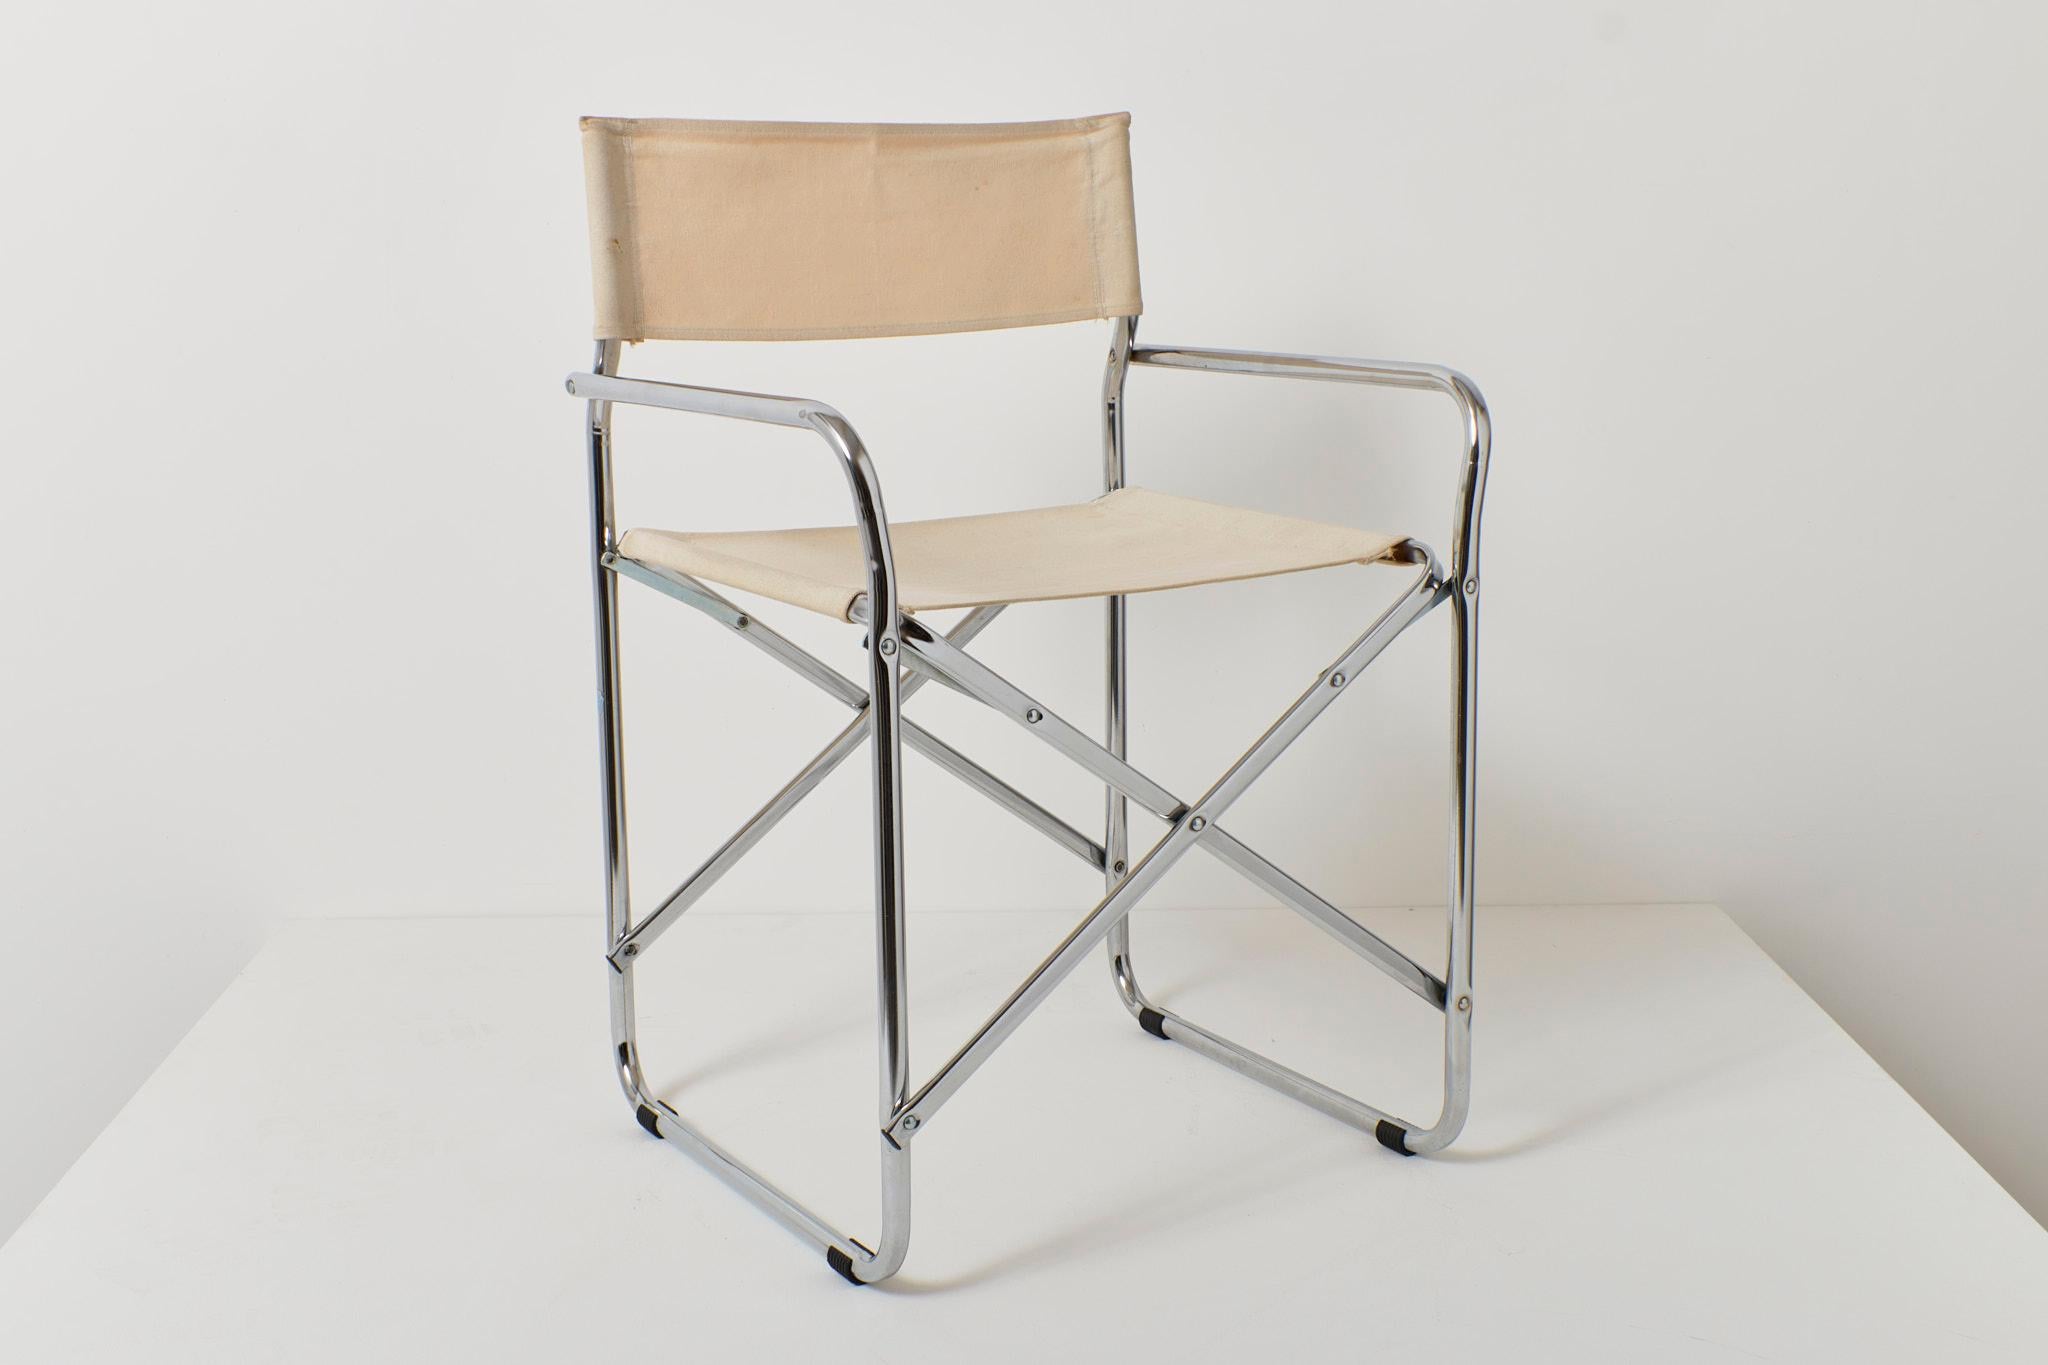 Italian folding chair with canvas seat on a chrome frame made by Grazioli Giocattoli. Circa 1970’s. The design is very similar to Gae Aulenti’s folding chair for Zanotta.

Condition is good with minor wear consistent with age.

Dimensions: W54cm